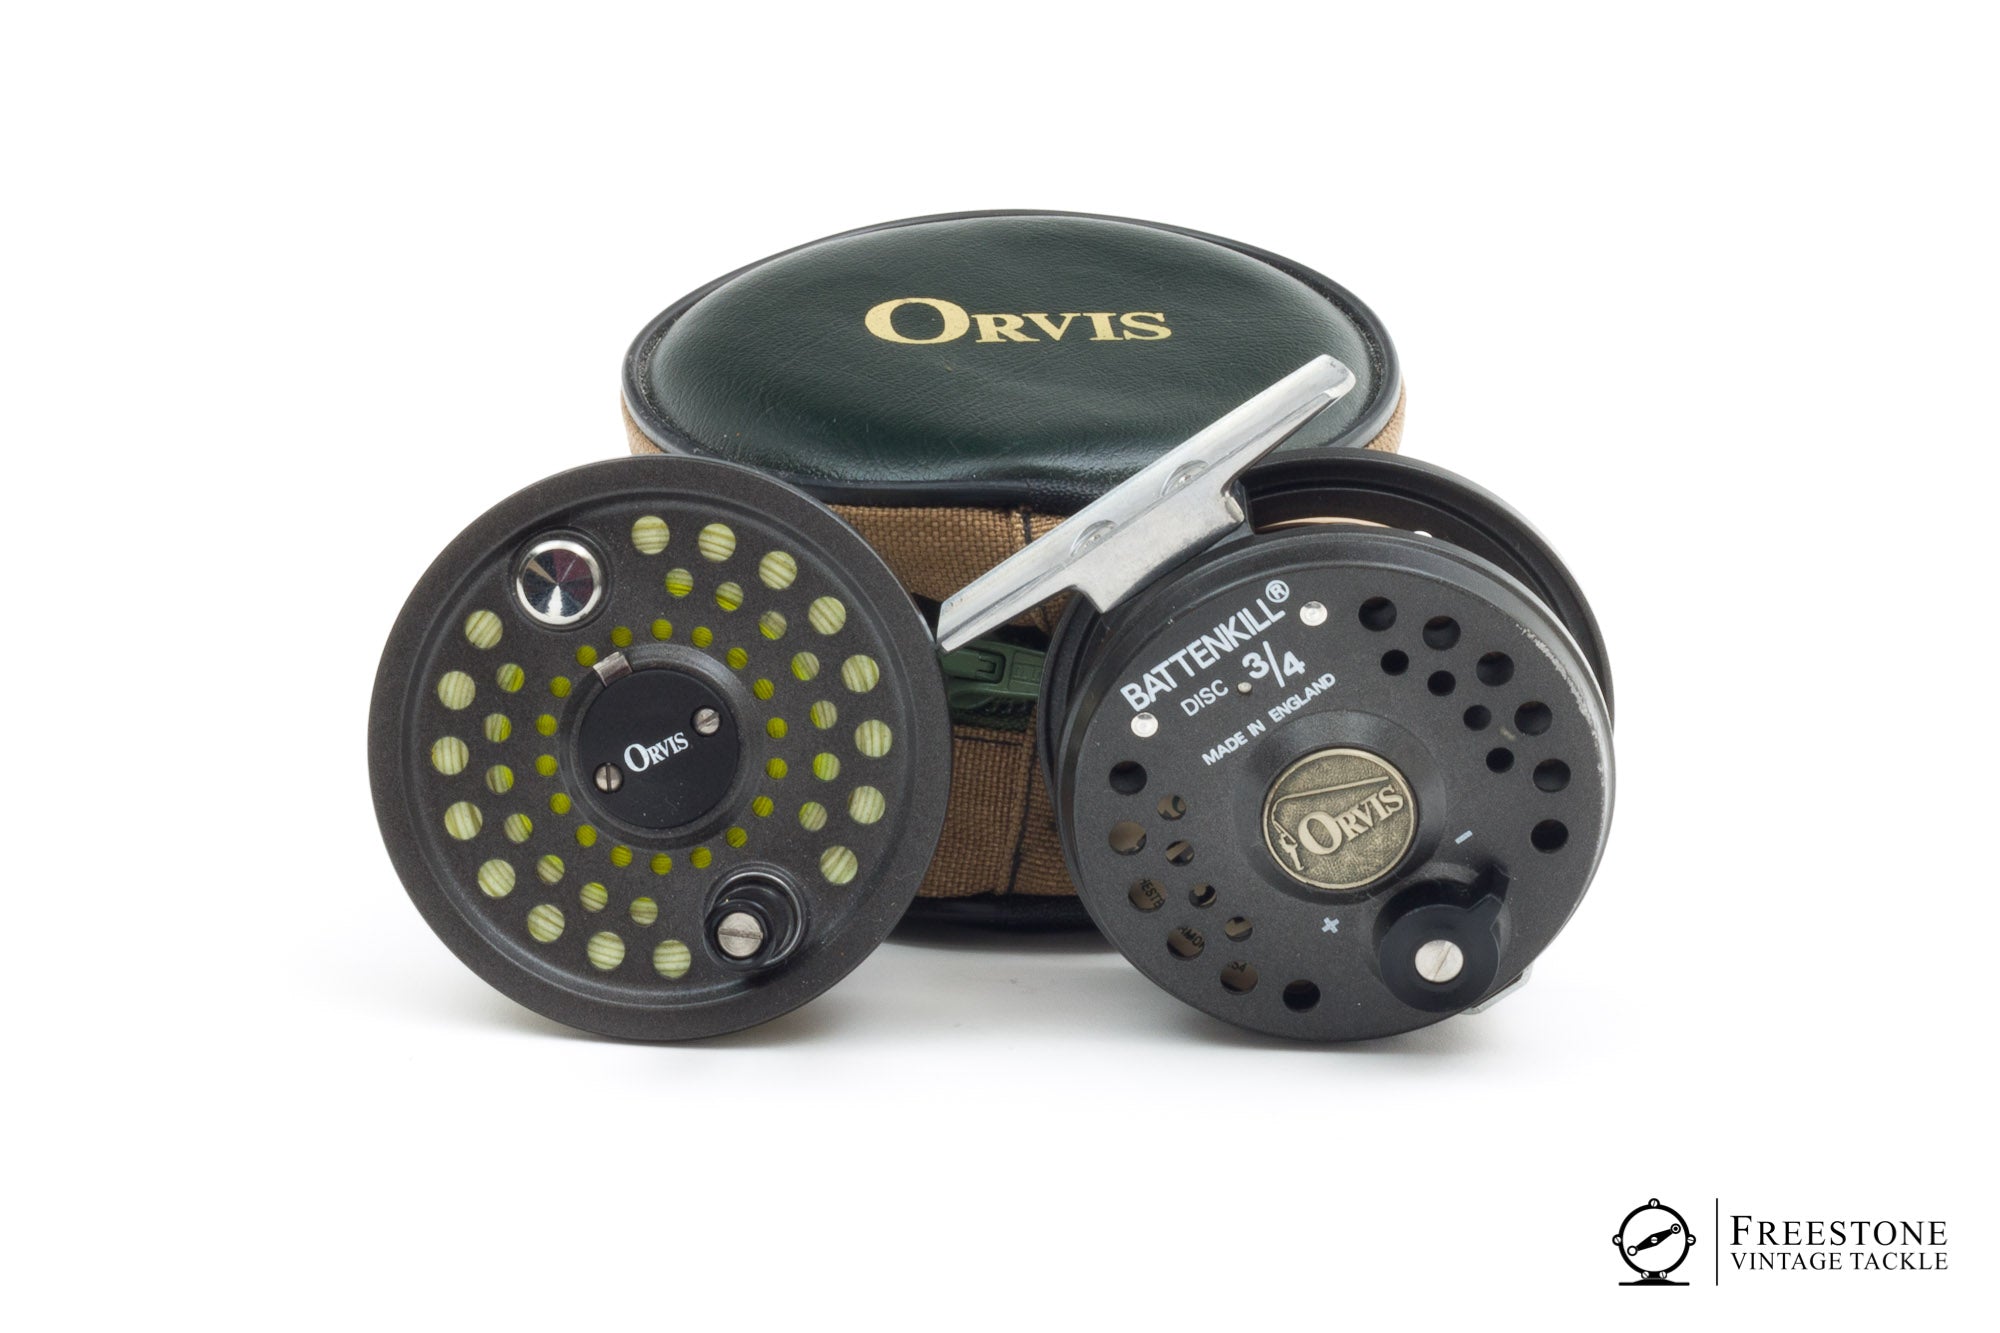 106: An Orvis Battenkill Disc 8/9 reel, made in England. Unused